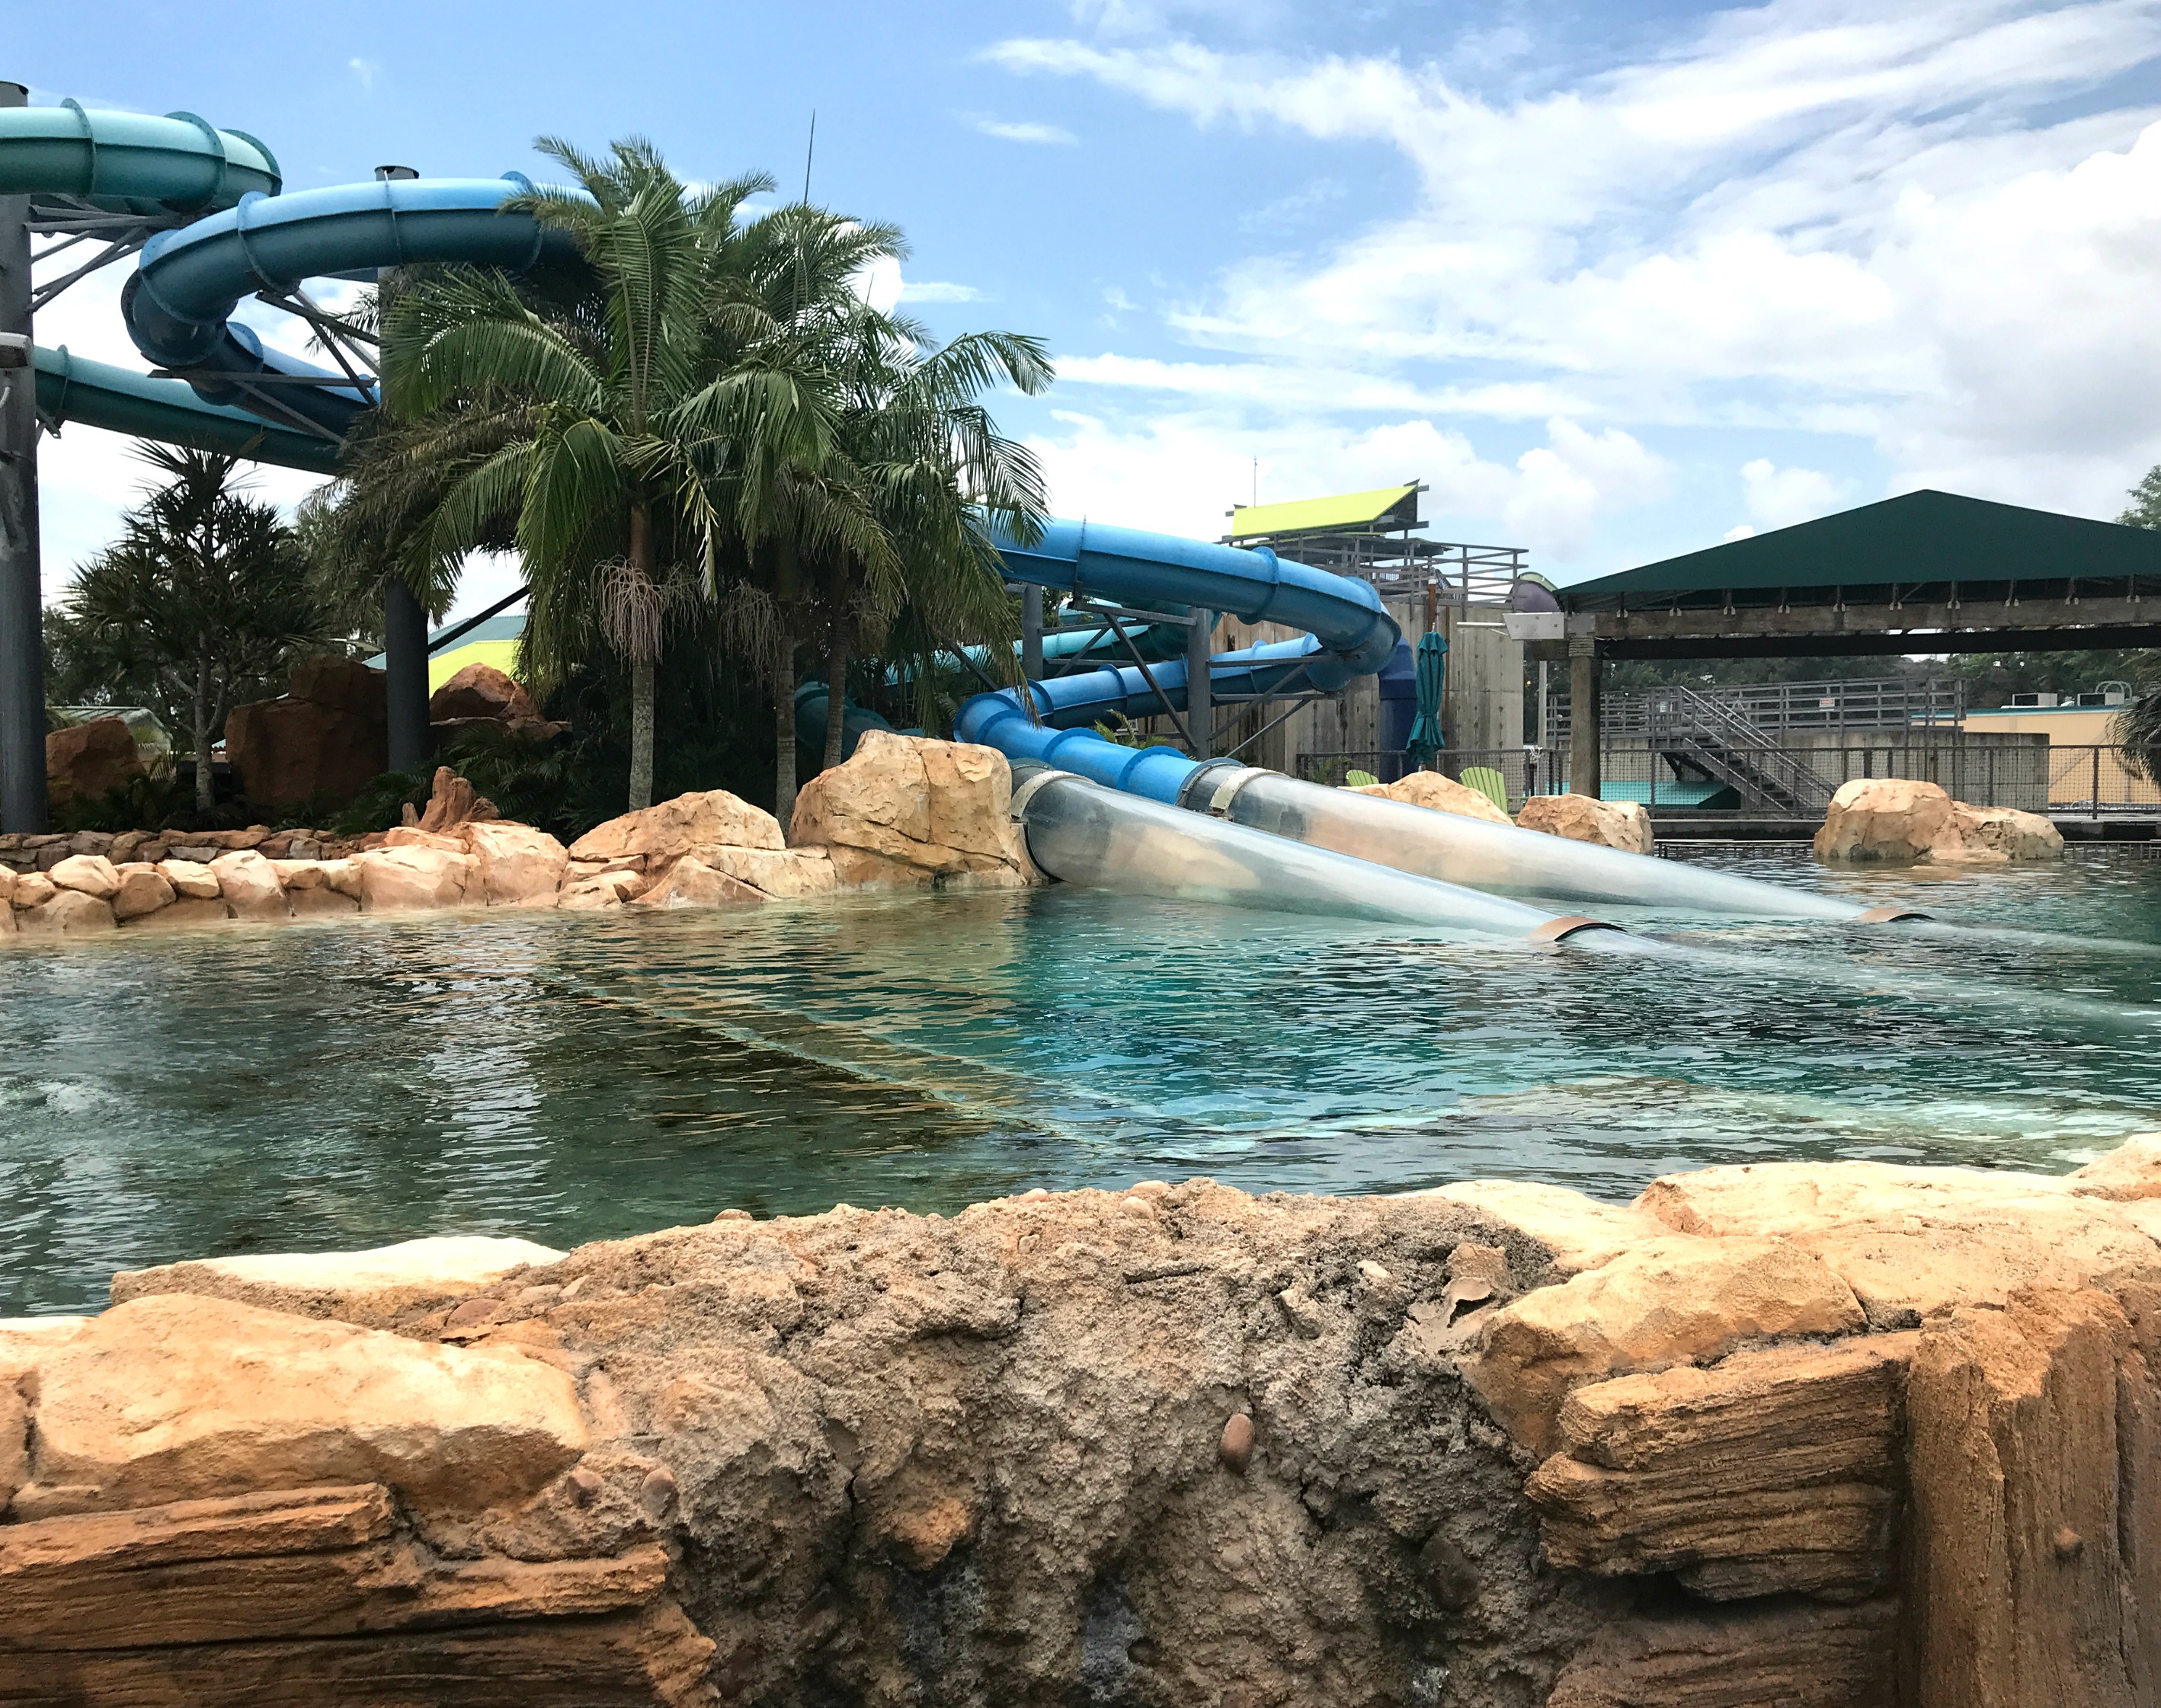 Top 8 Water Parks in Florida for Cooling Off from the Hot Florida Sun!